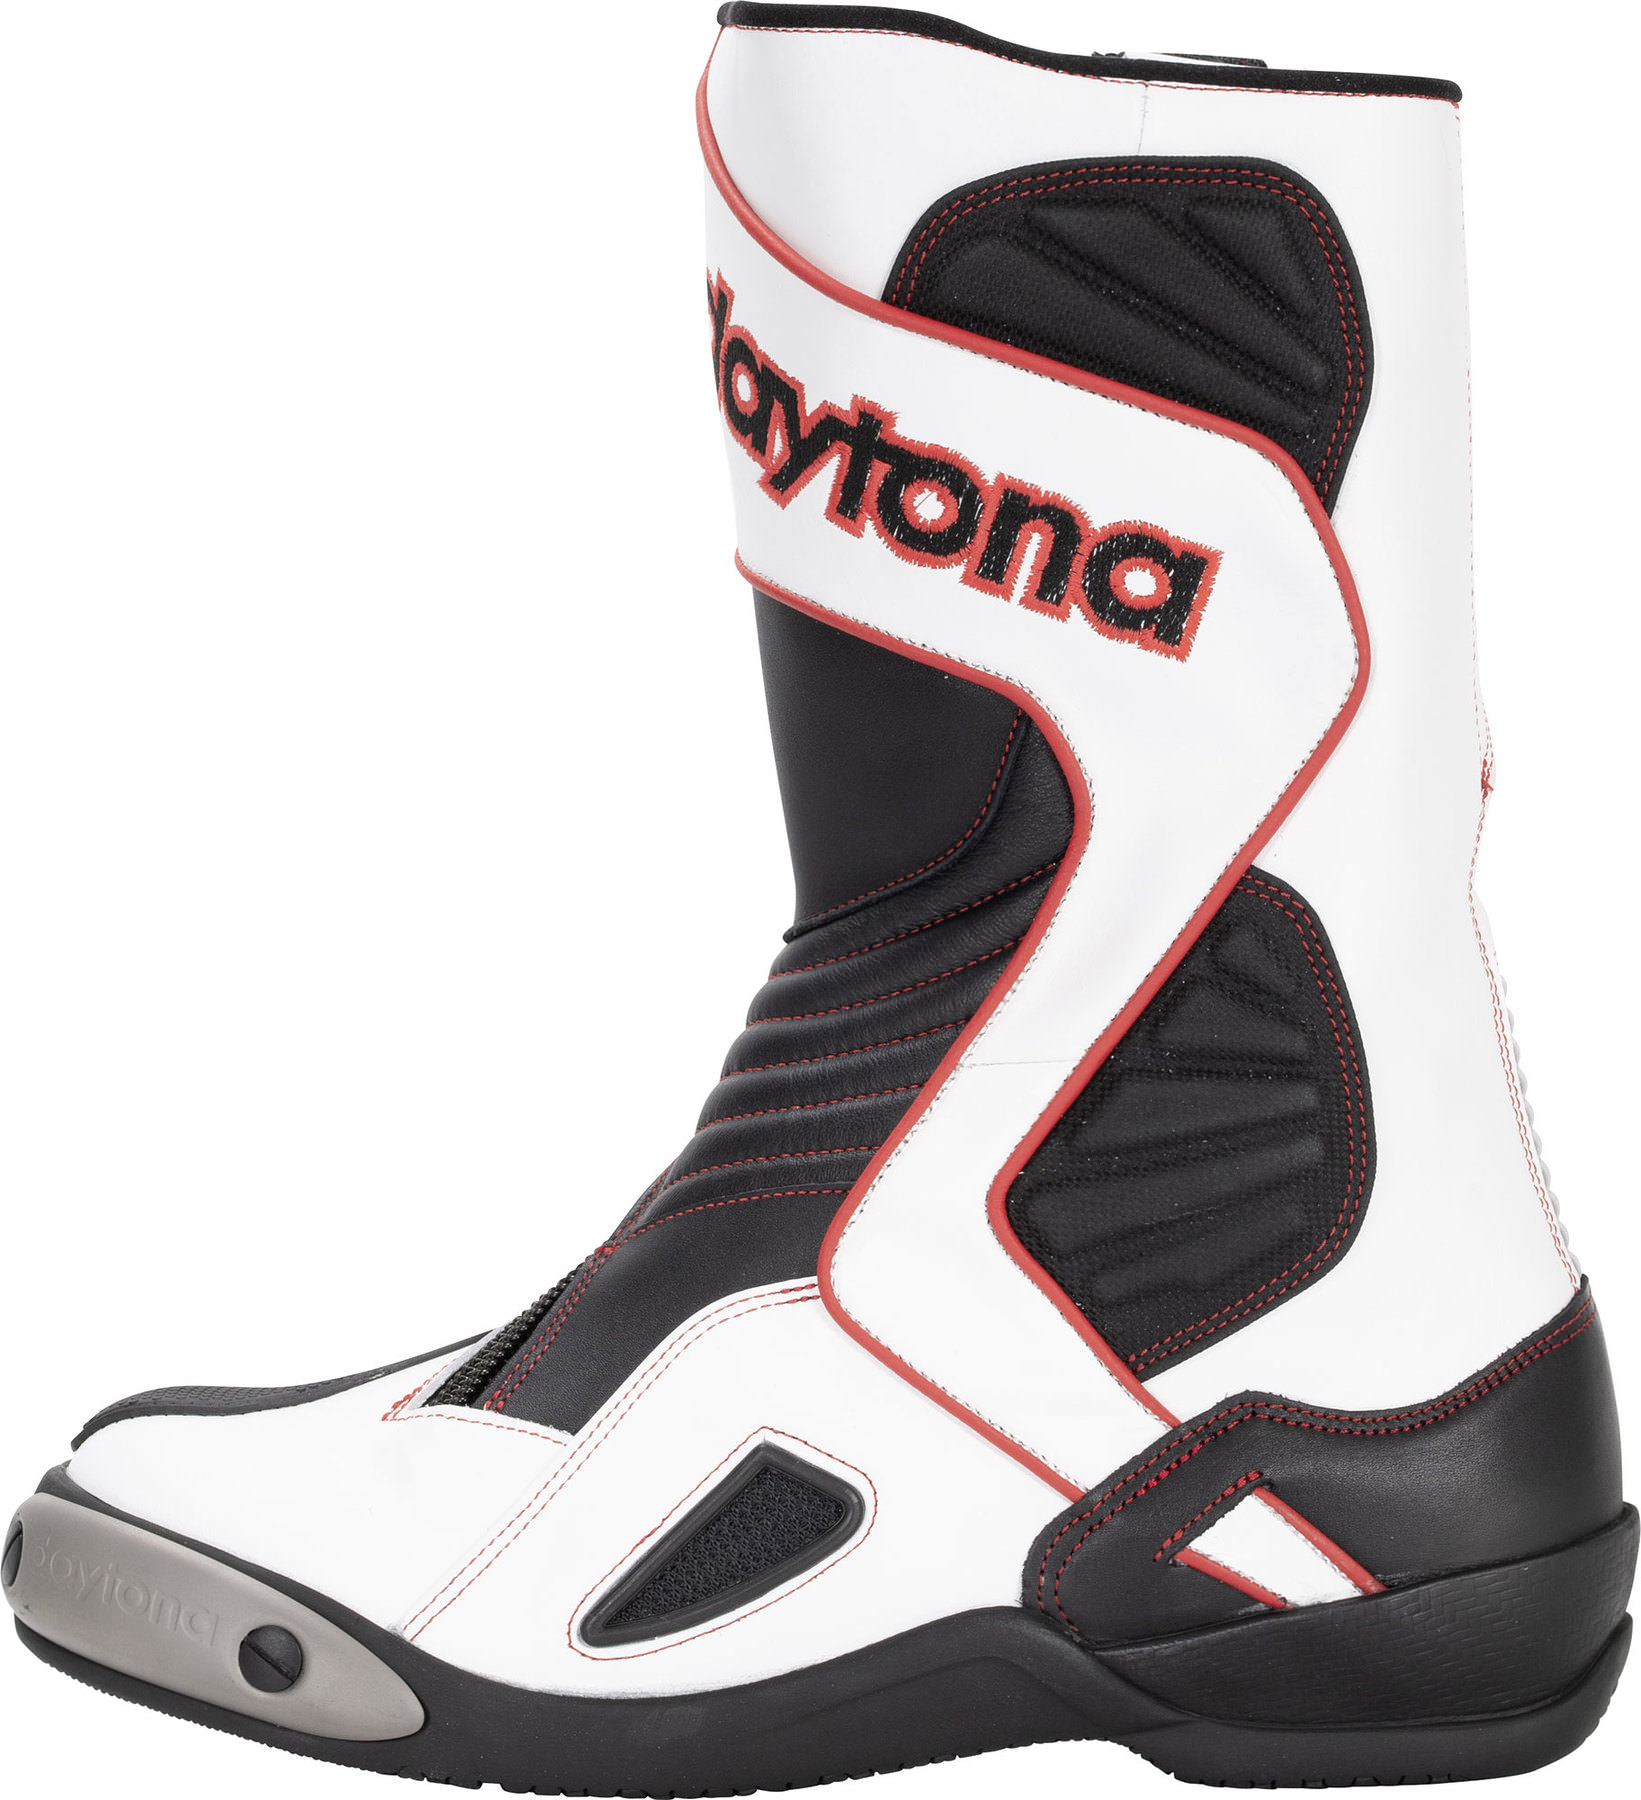 Buy Daytona Evo Voltex Boots | Louis motorcycle clothing and 